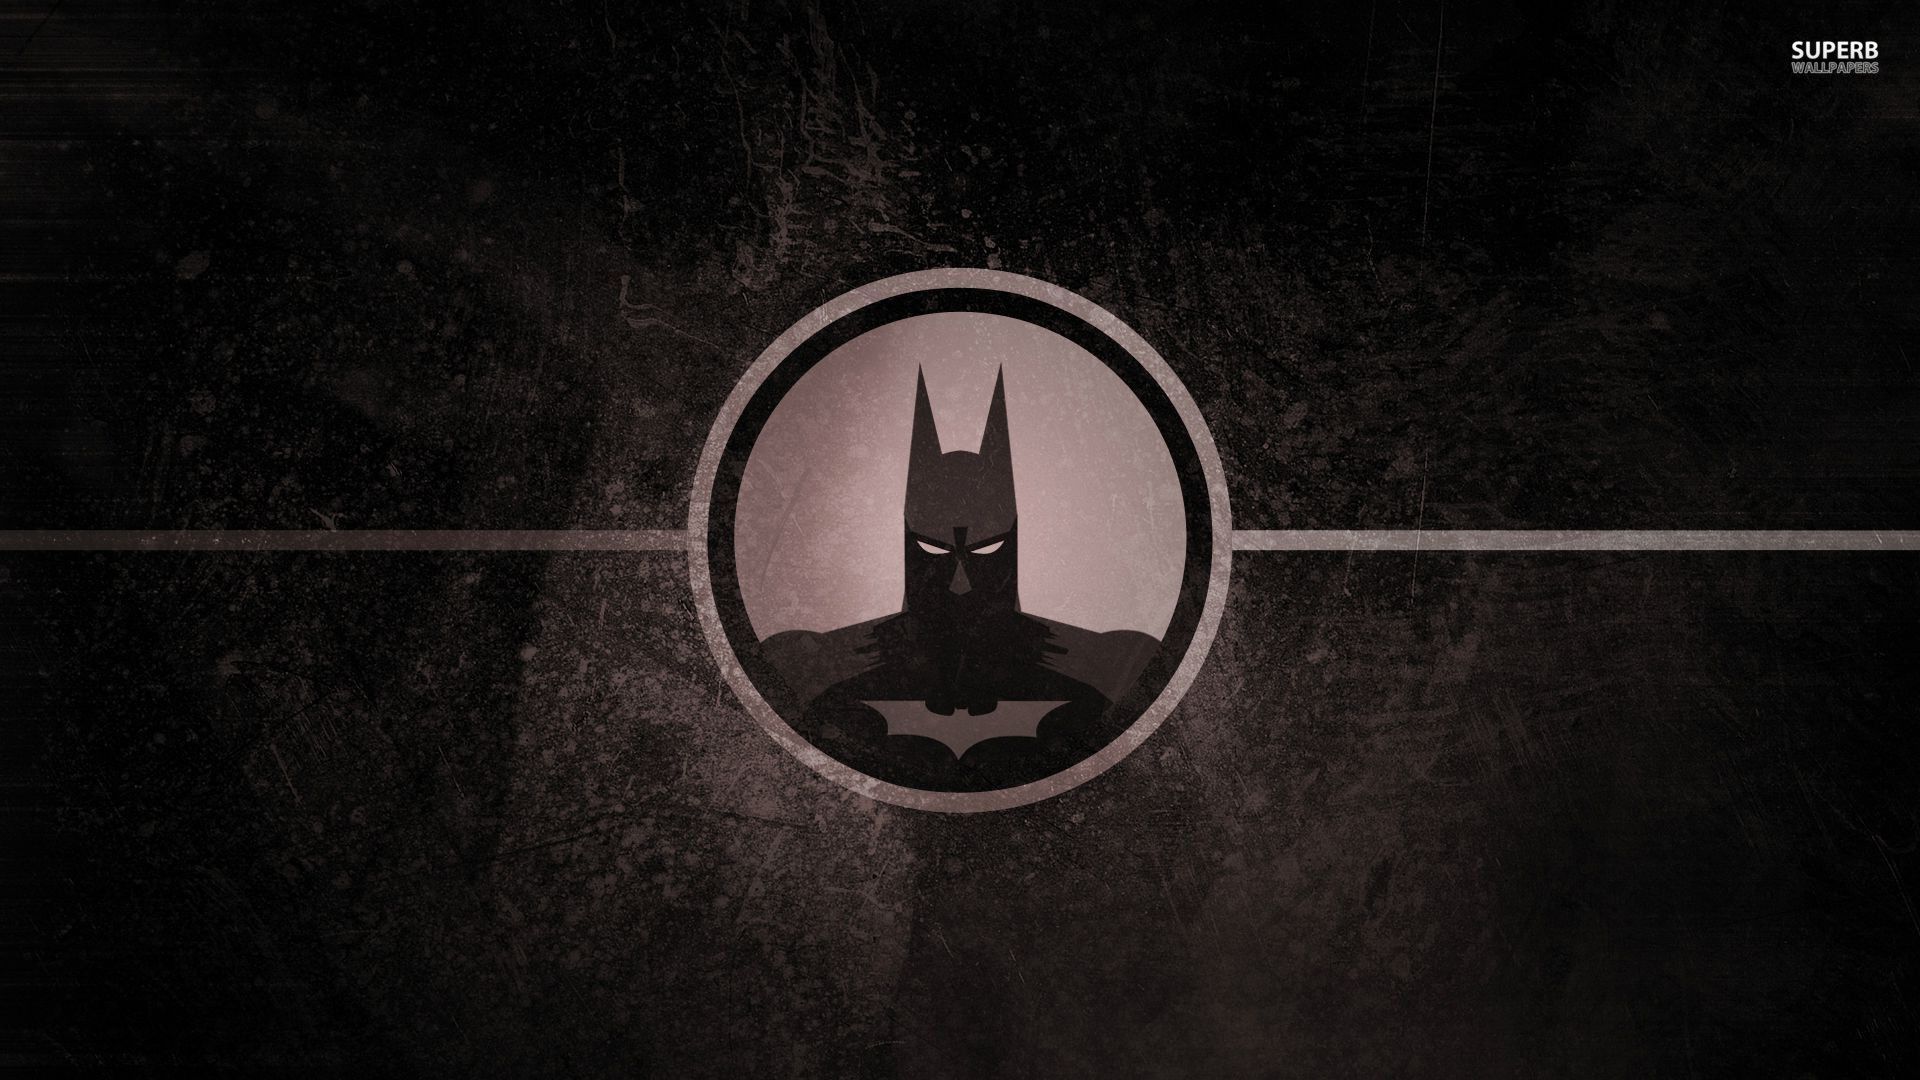 Batman Wallpapers for Computer 5189 - HD Wallpapers Site